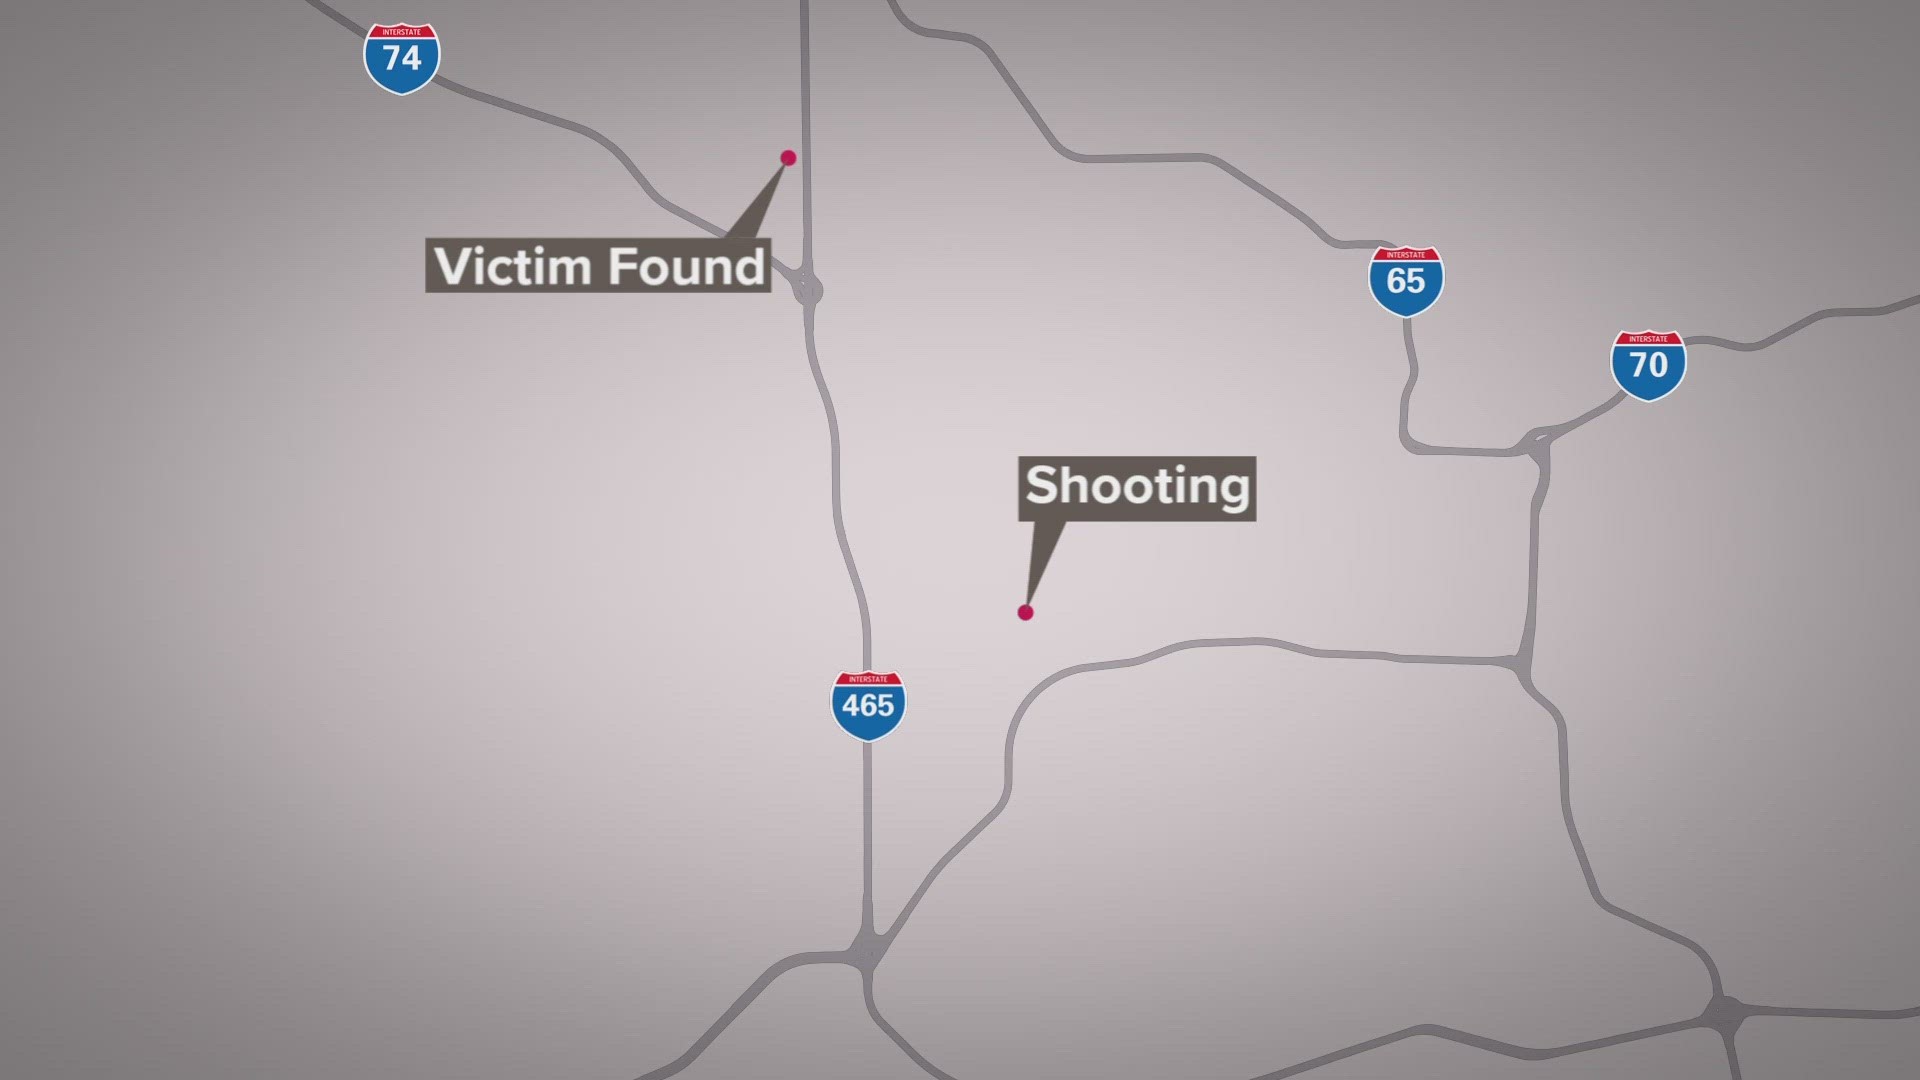 The victim and suspect were found in a car in the 3800 block of Eagle View Drive, near West 38th Street and I-465.